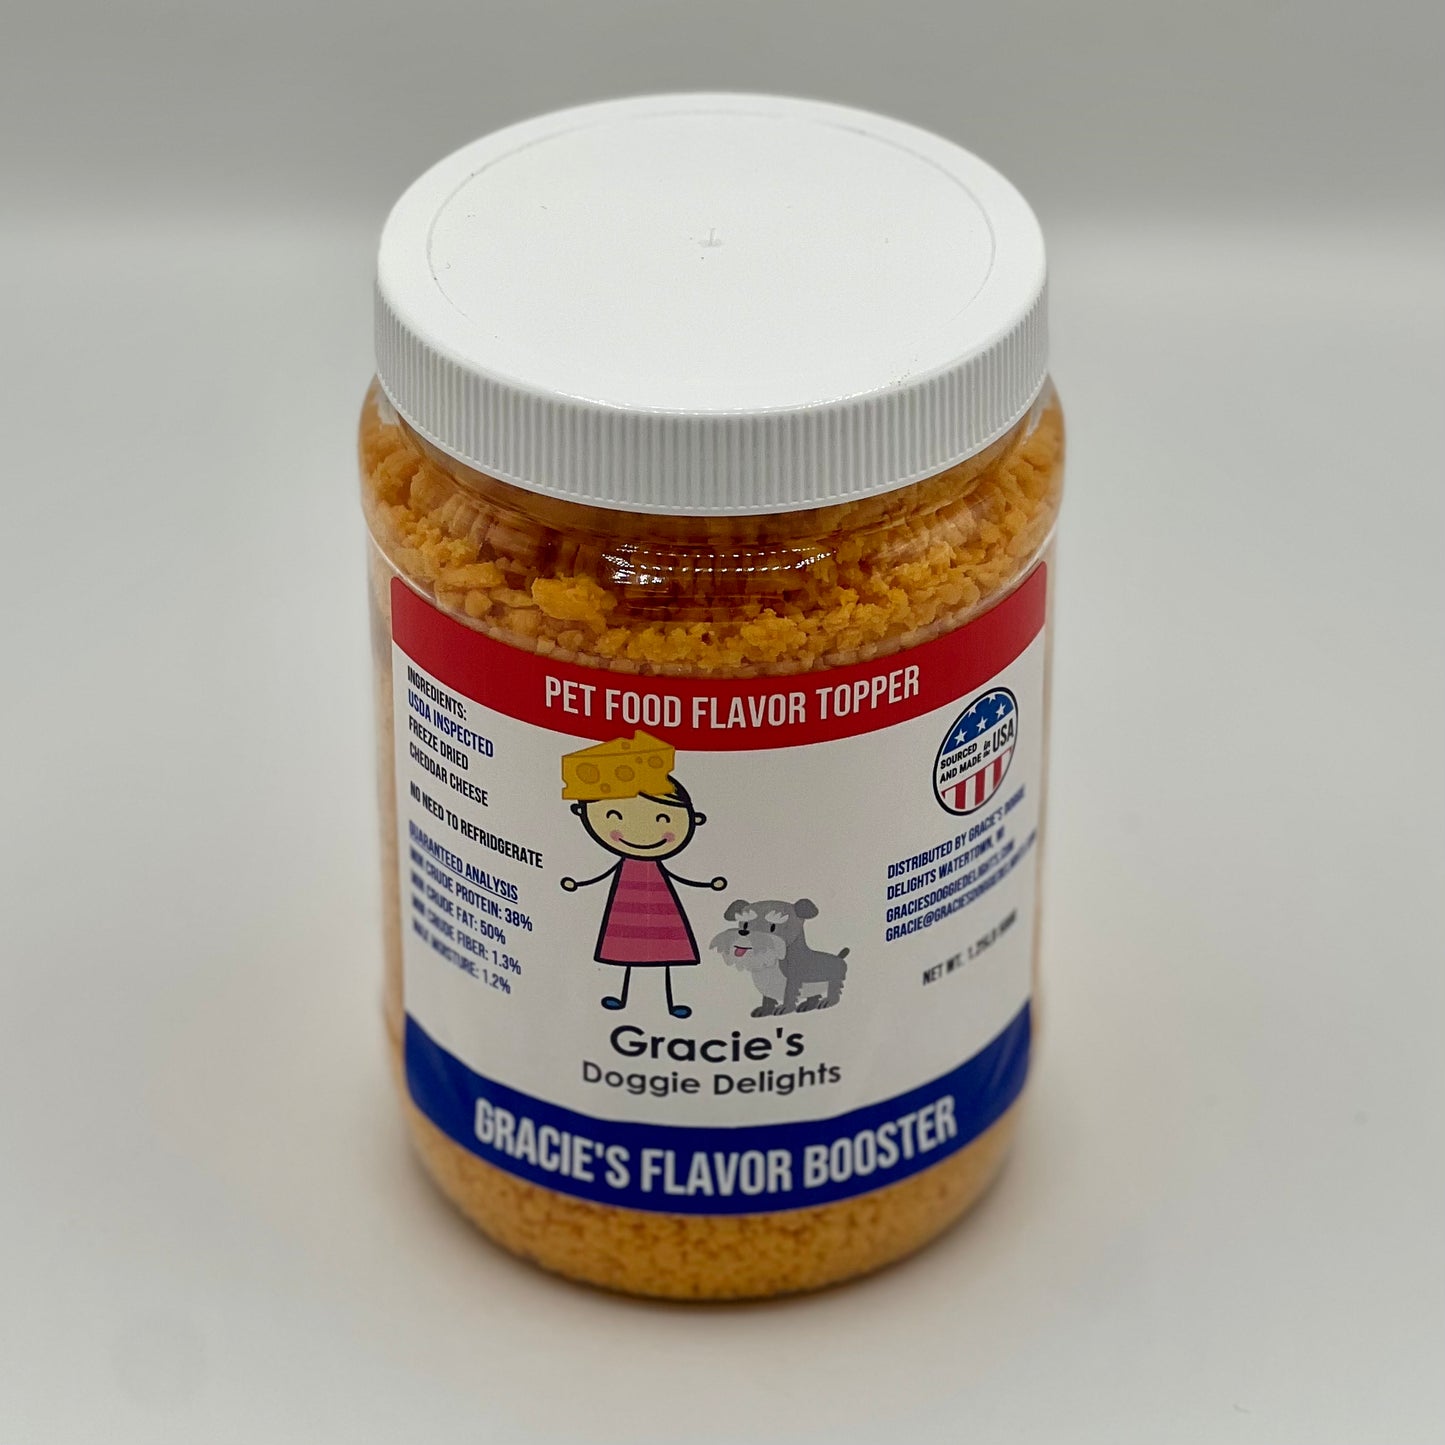 Gracie's Flavor Booster Pet Food Toppers